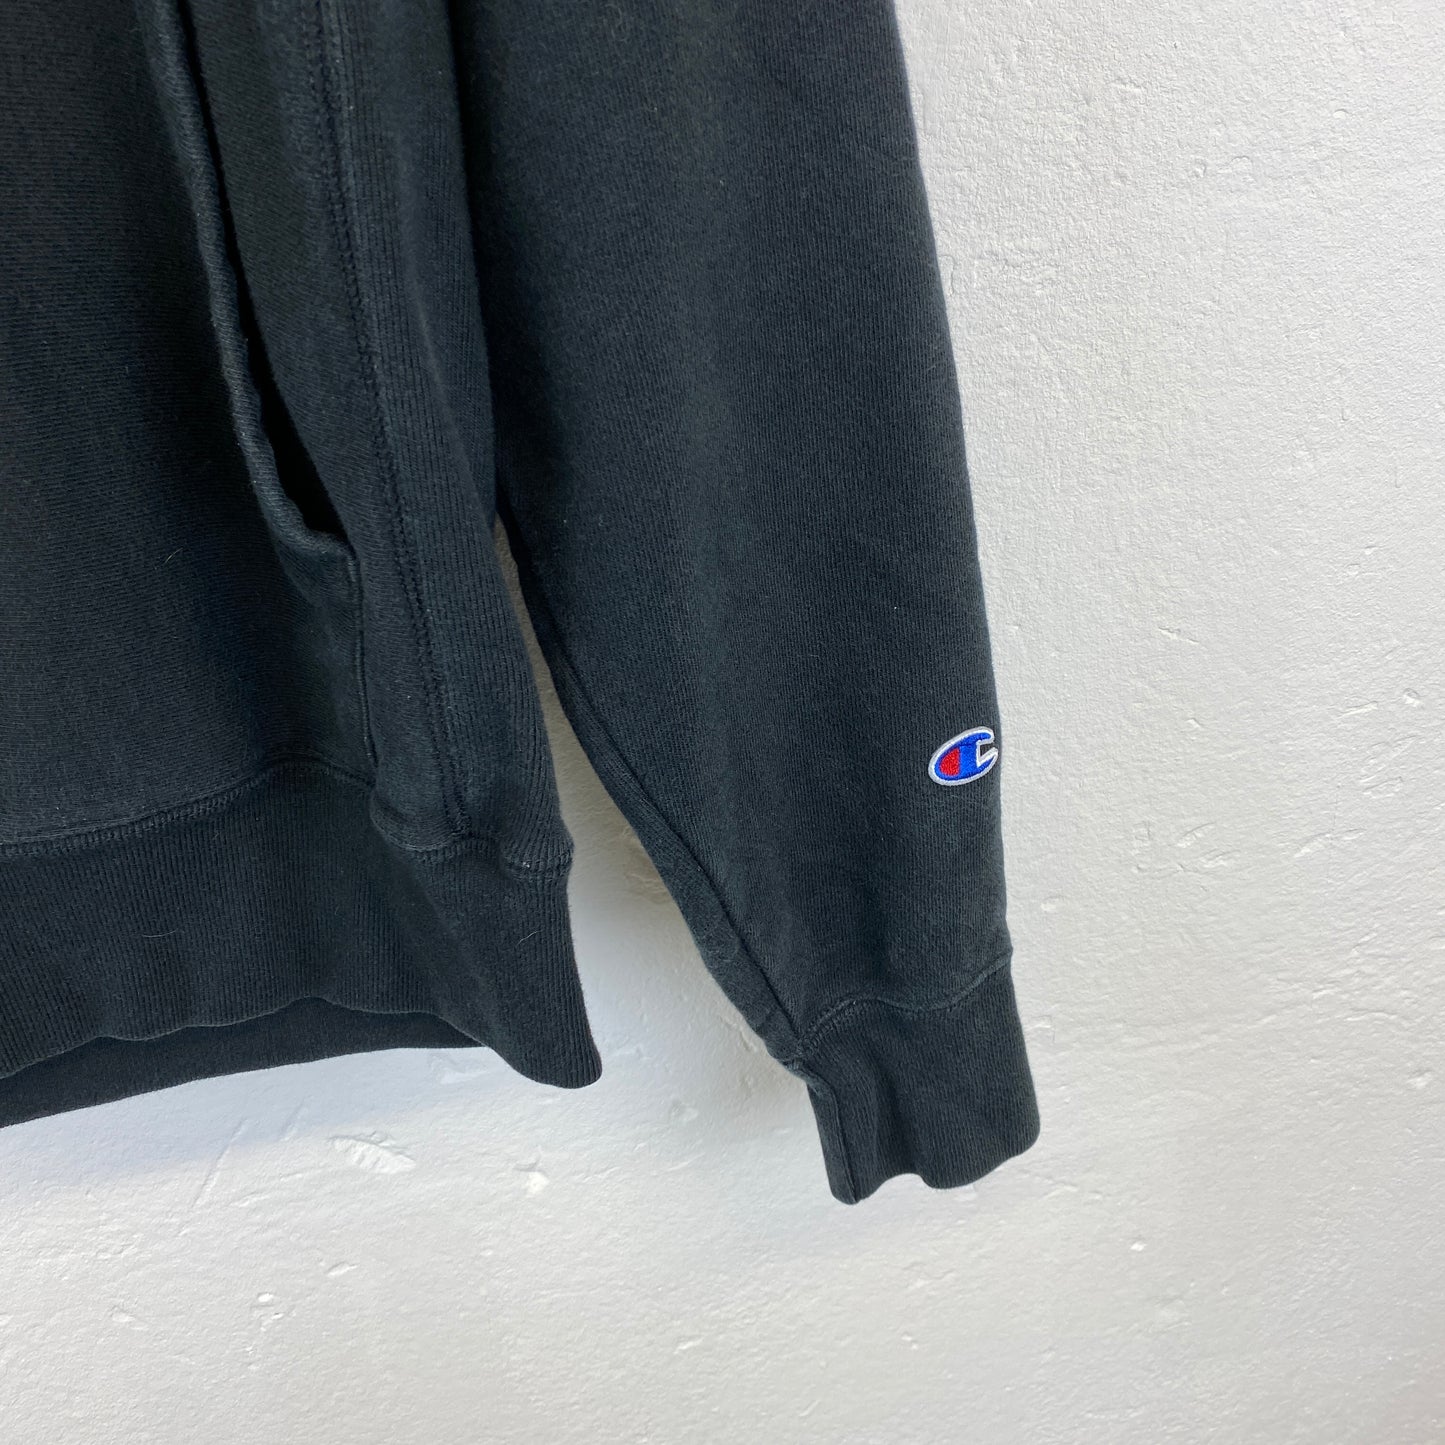 Champion heavyweight embroidered hoodie (XS-S)